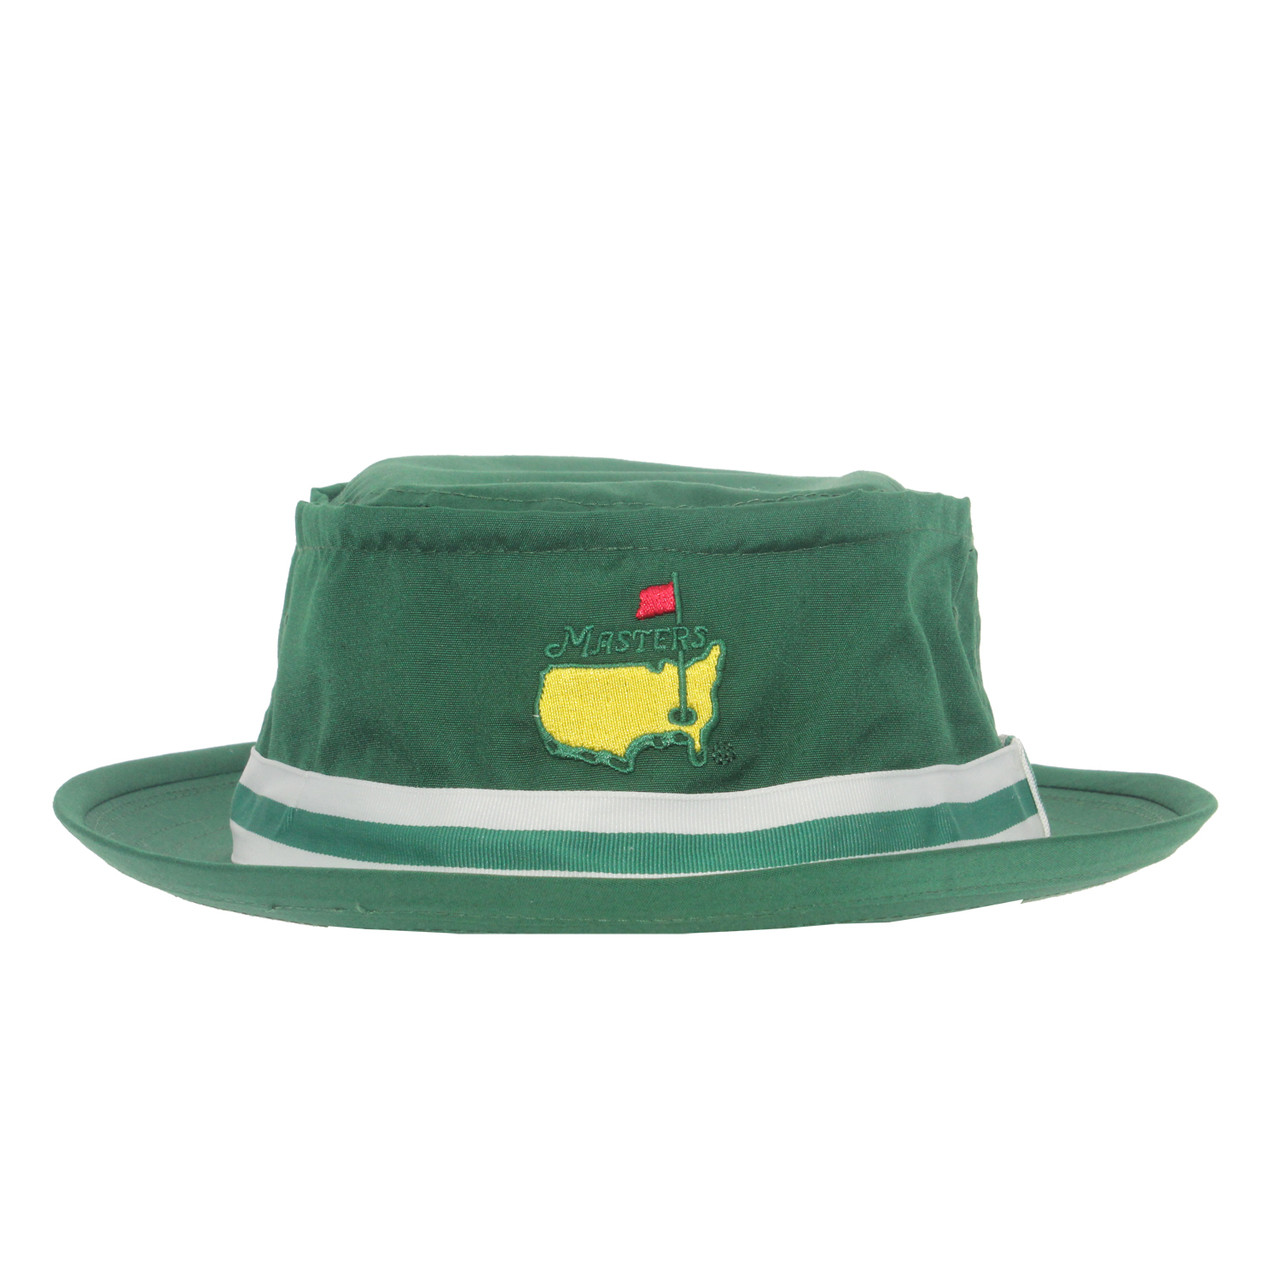 https://cdn11.bigcommerce.com/s-kslyfzumby/images/stencil/1280x1280/products/1071/1805/buckethat-green-front__19646.1554761096.jpg?c=2